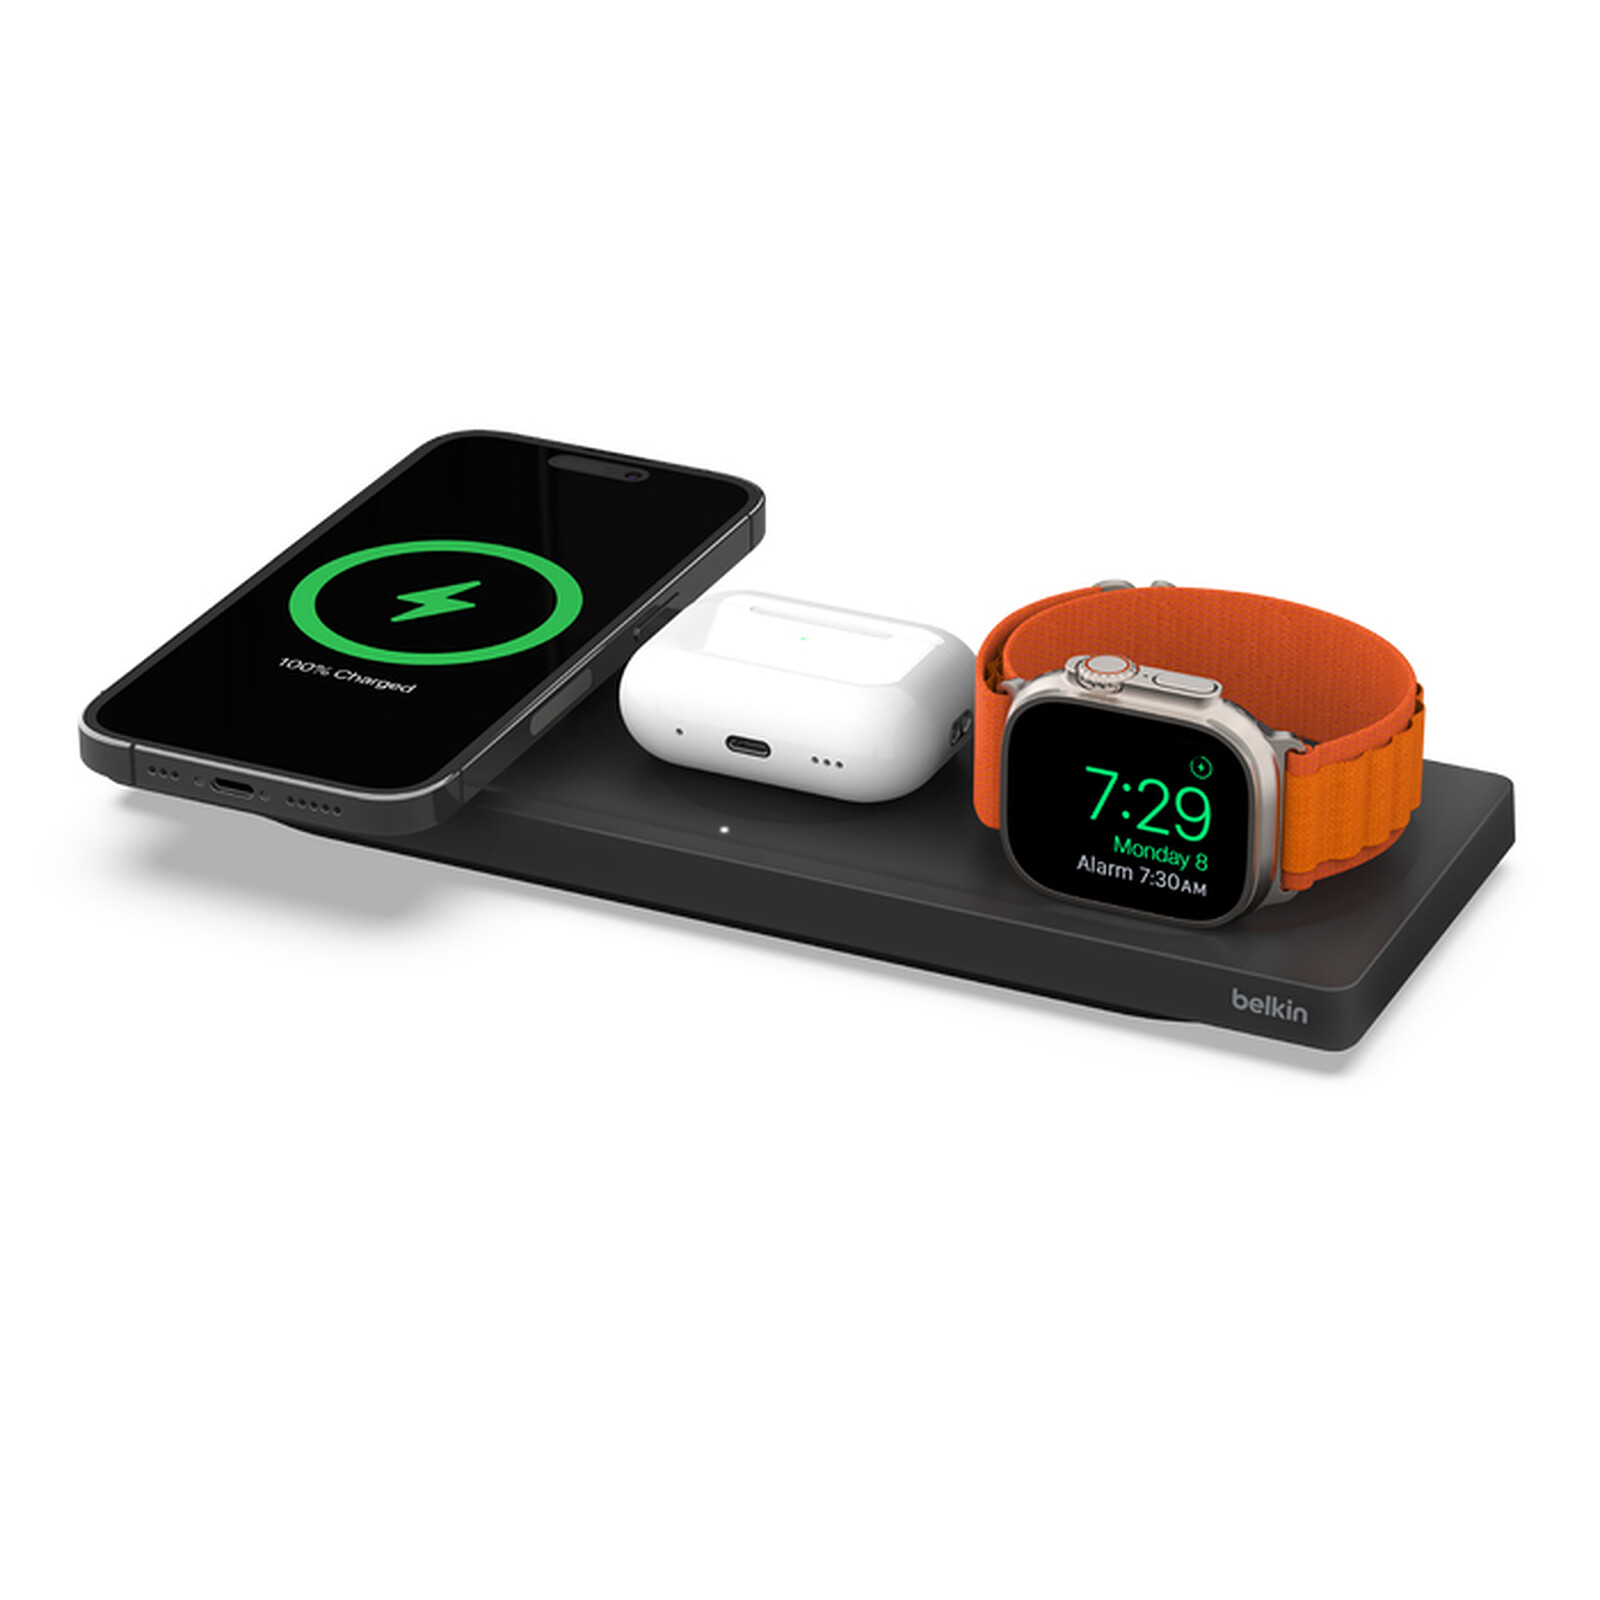 BoostCharge Pro 2-in-1 Wireless Charging Dock with MagSafe 15W 